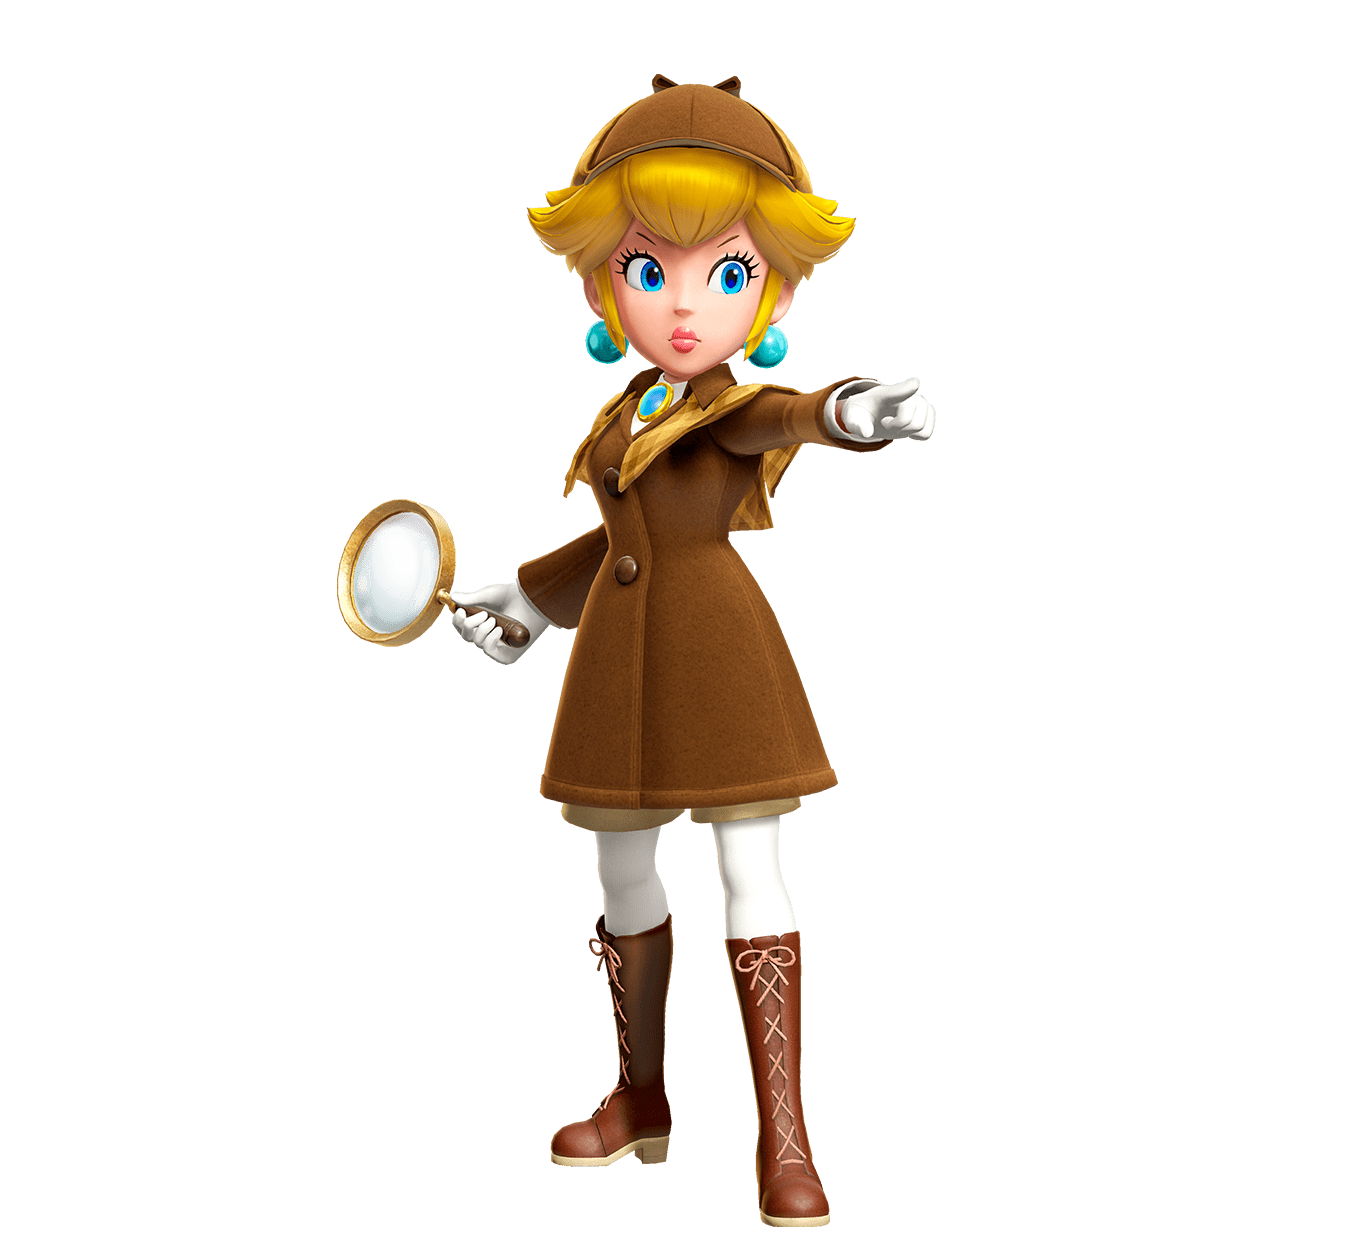 Peach points assertively and brandishes a magnifying glass in her left hand. She wears a brown coat and a deerstalker hat.